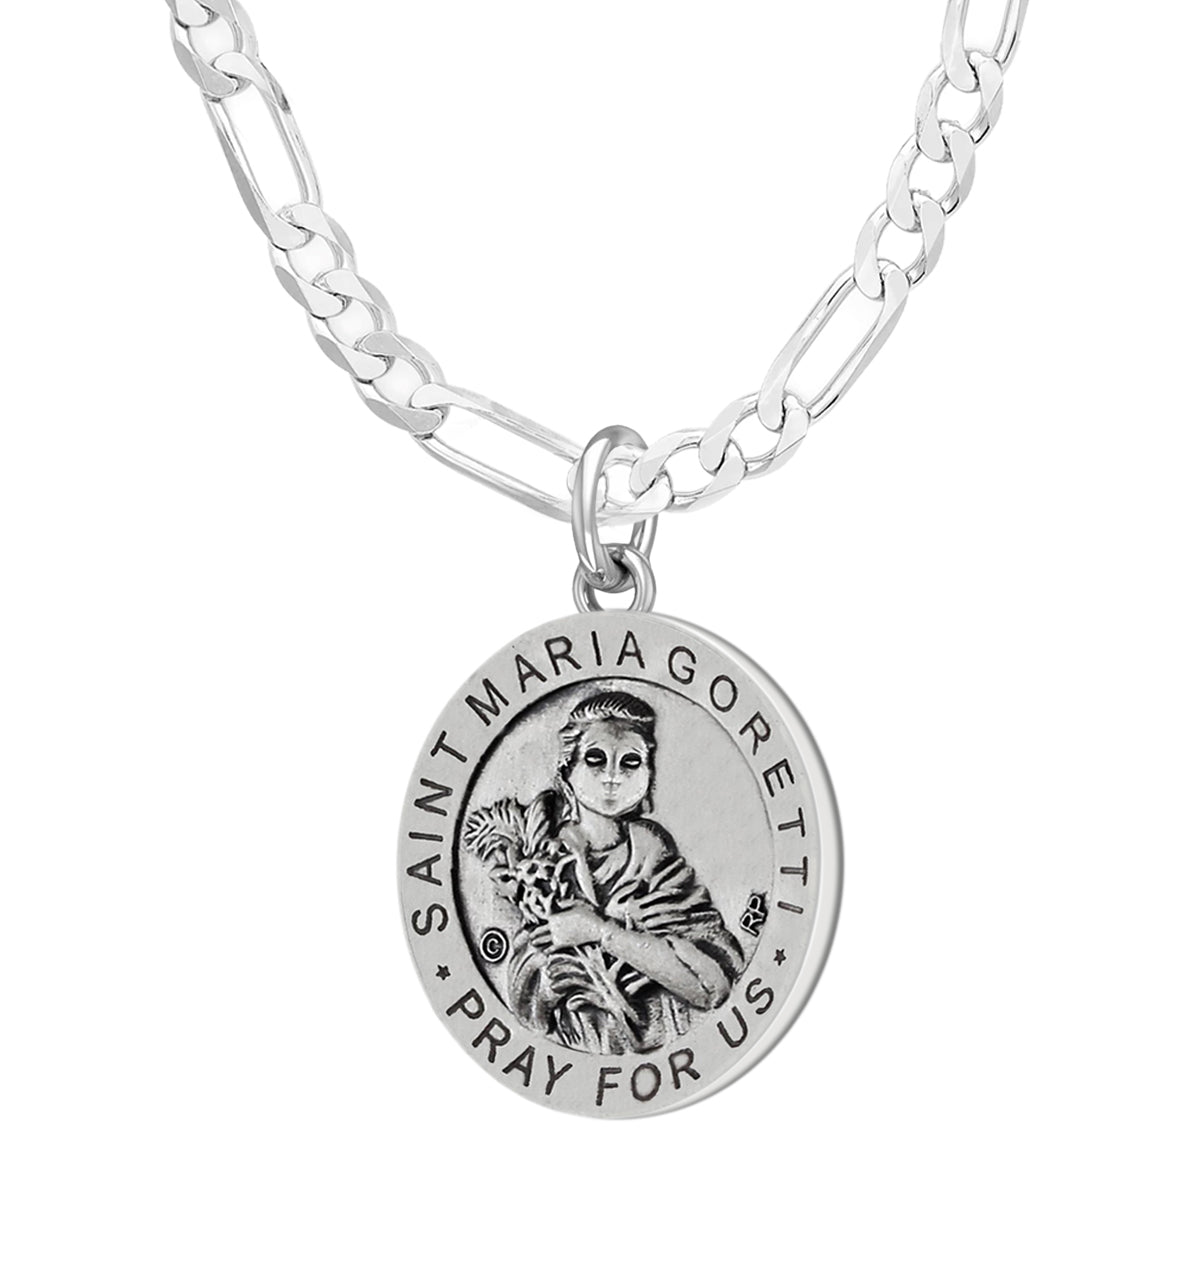 Ladies 925 Sterling Silver 18.5mm Antiqued Saint Maria Goretti Medal Pendant Necklace - US Jewels